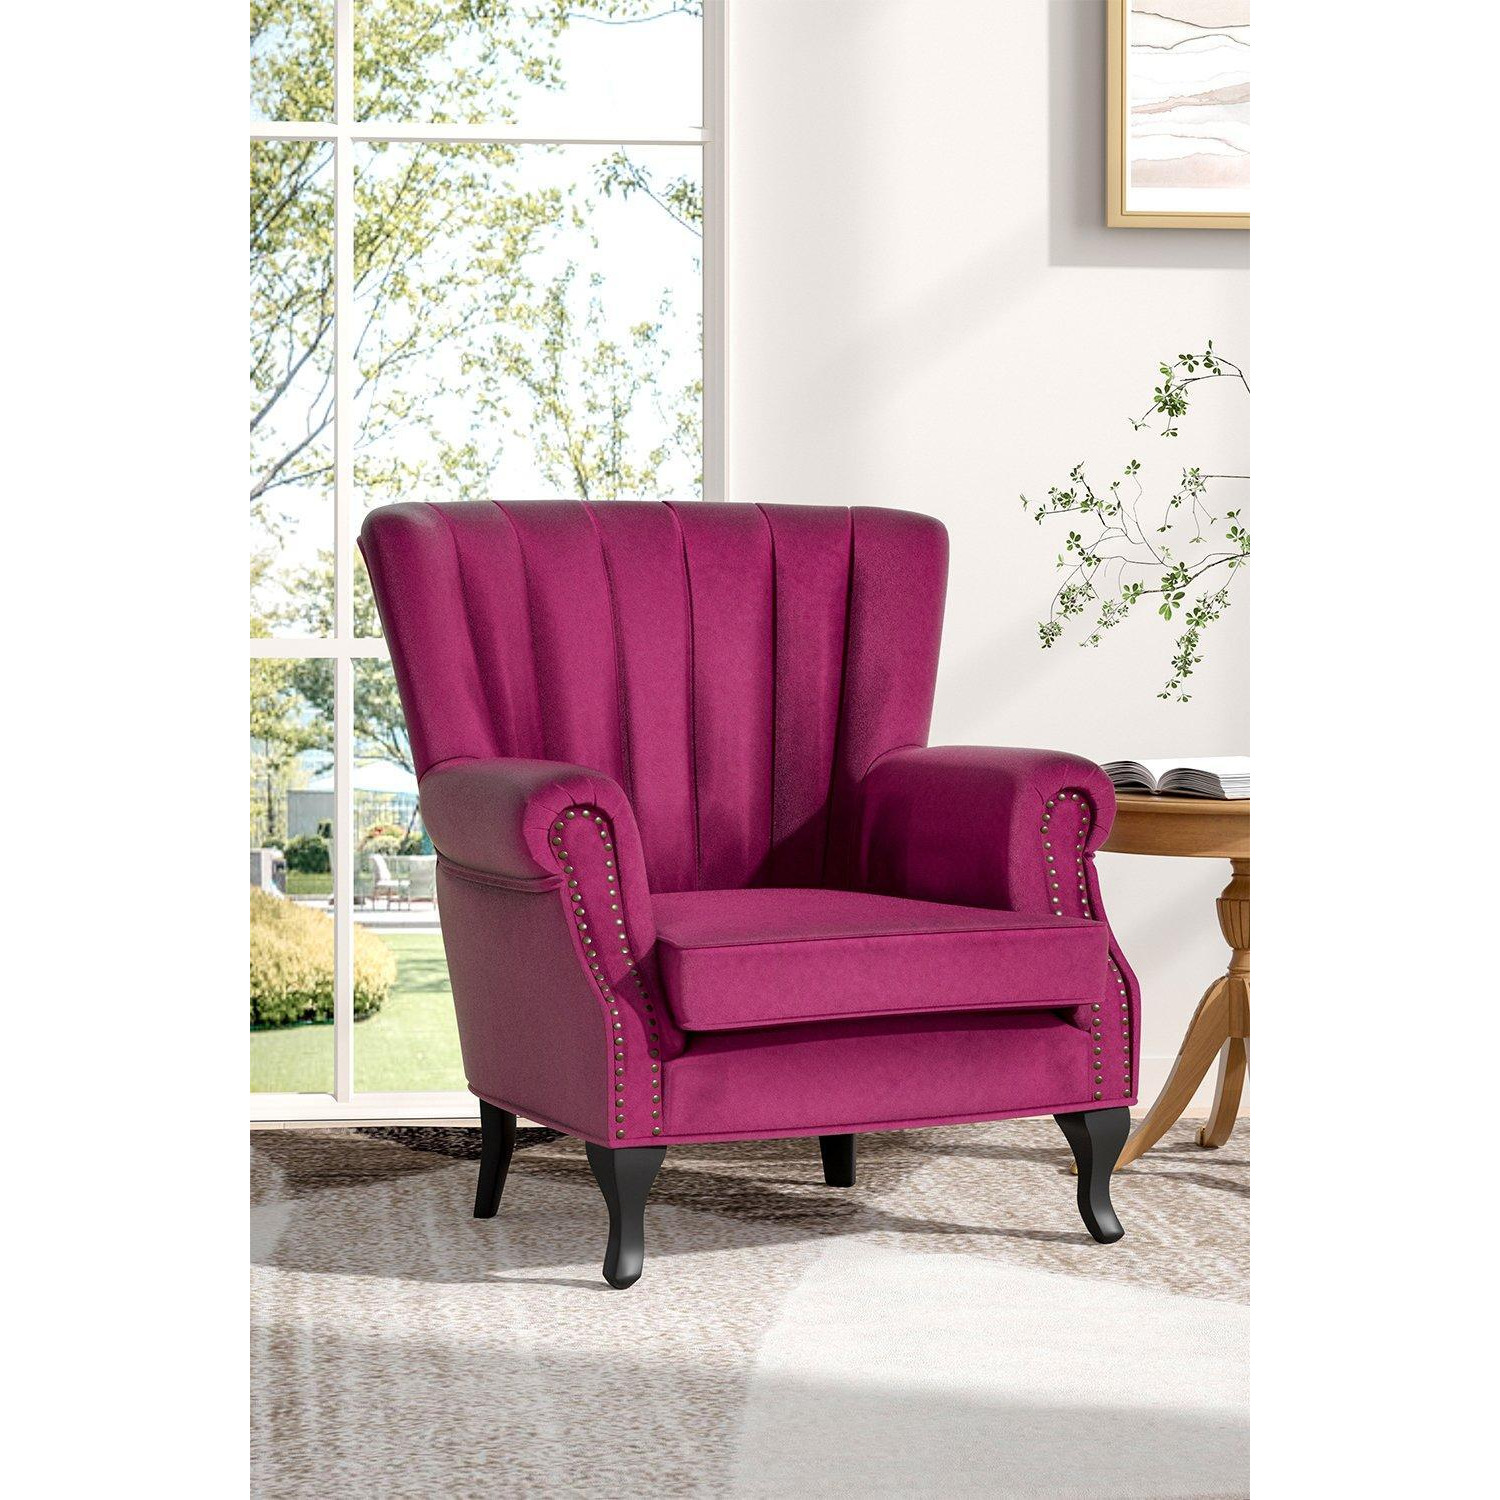 Old-fashion Velvet Wing Back Armchair with Studs - image 1